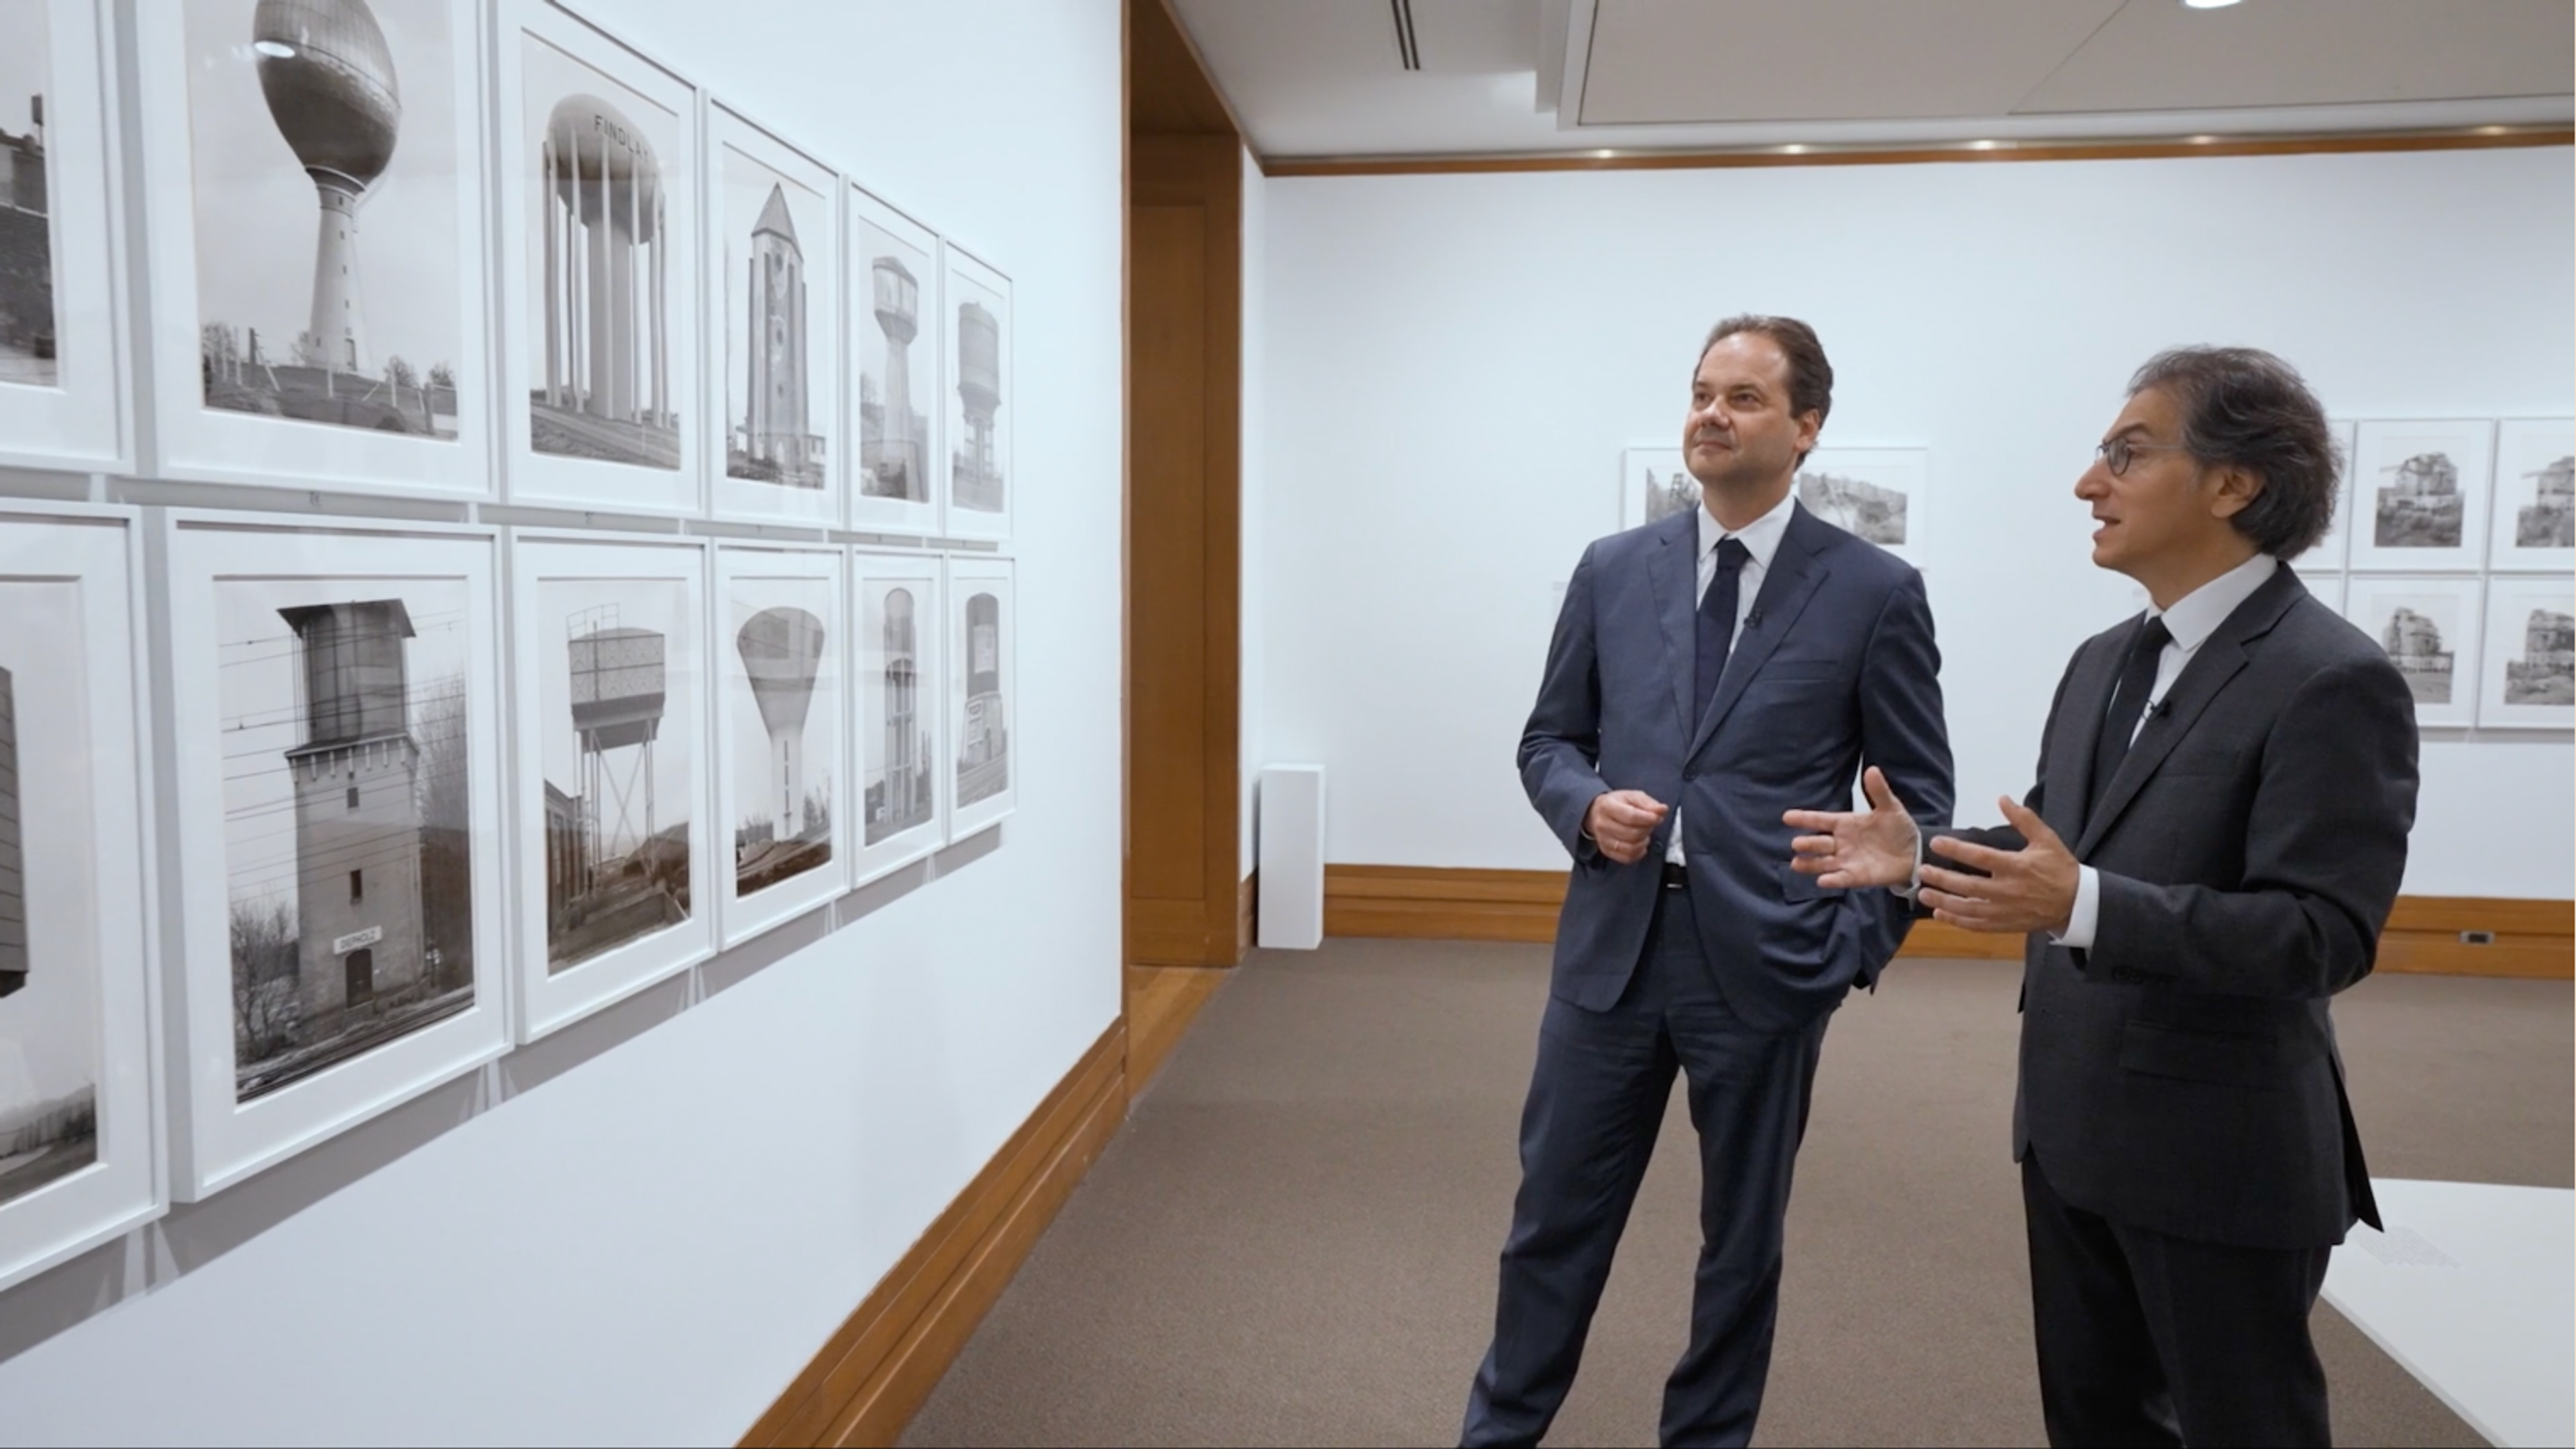 Two men in suits standing in gallery facing a wall of photographs.